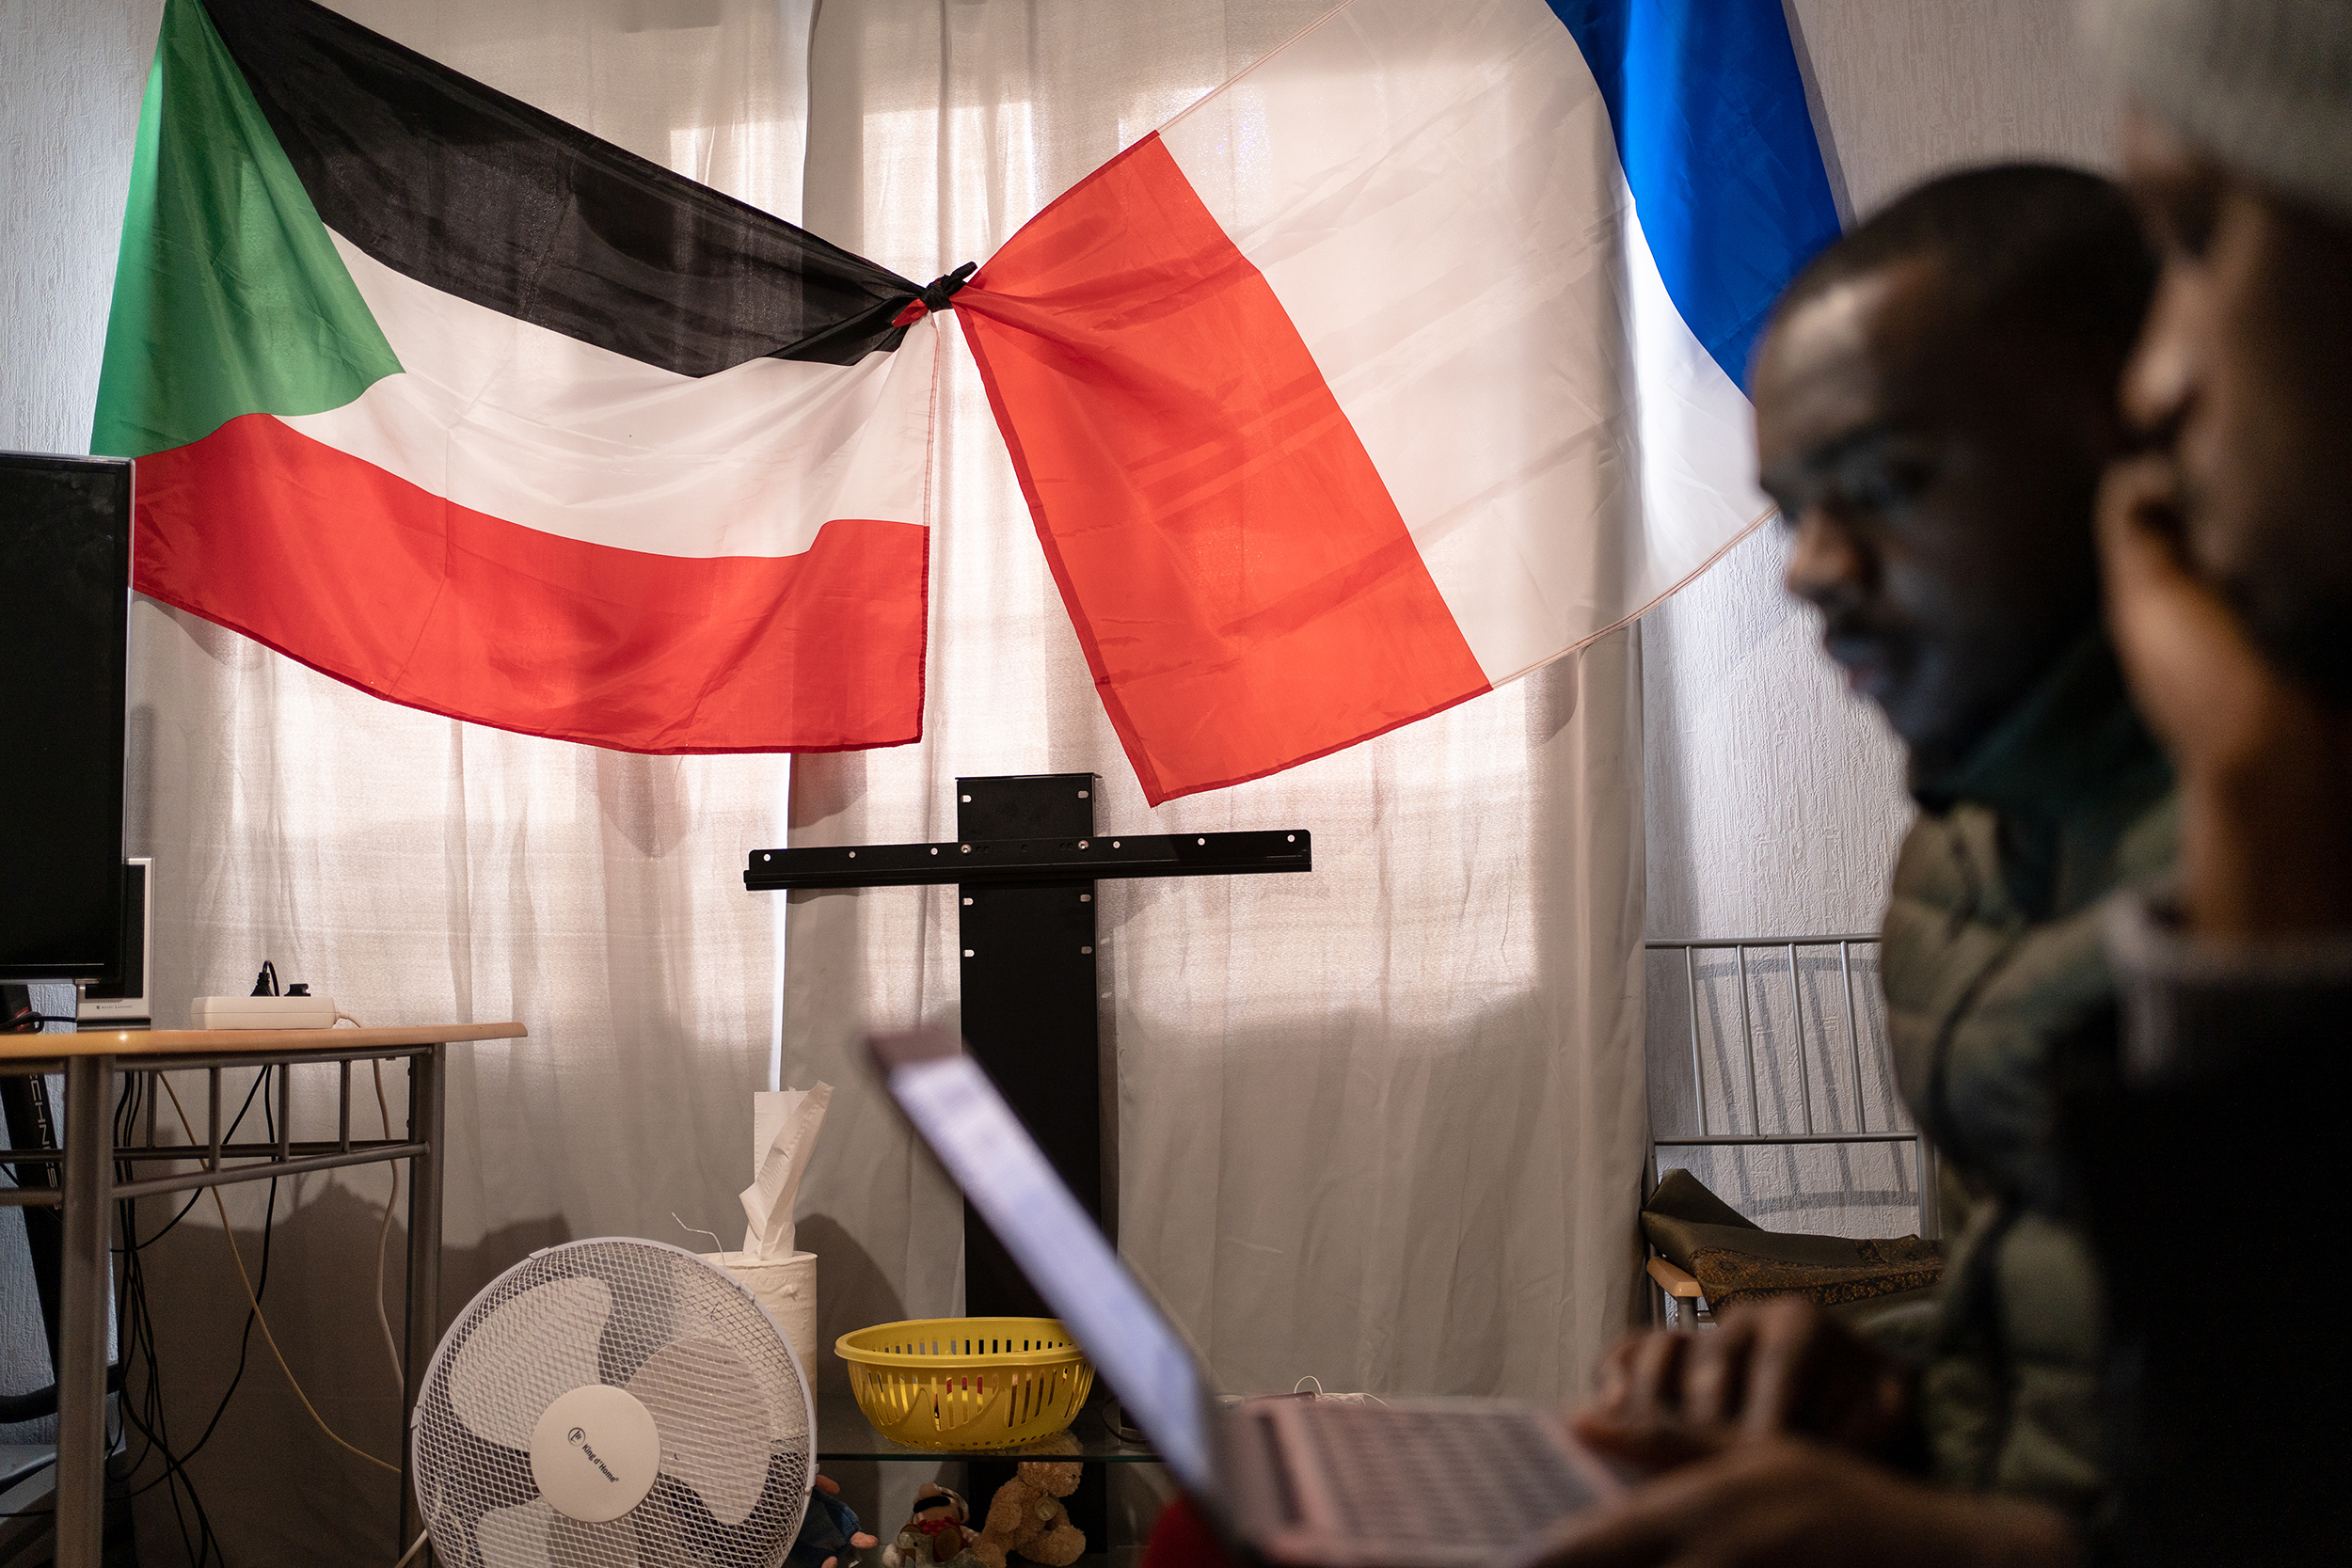 A man and a woman sitting in front of a laptop, with the flags of Sudan and France in the background